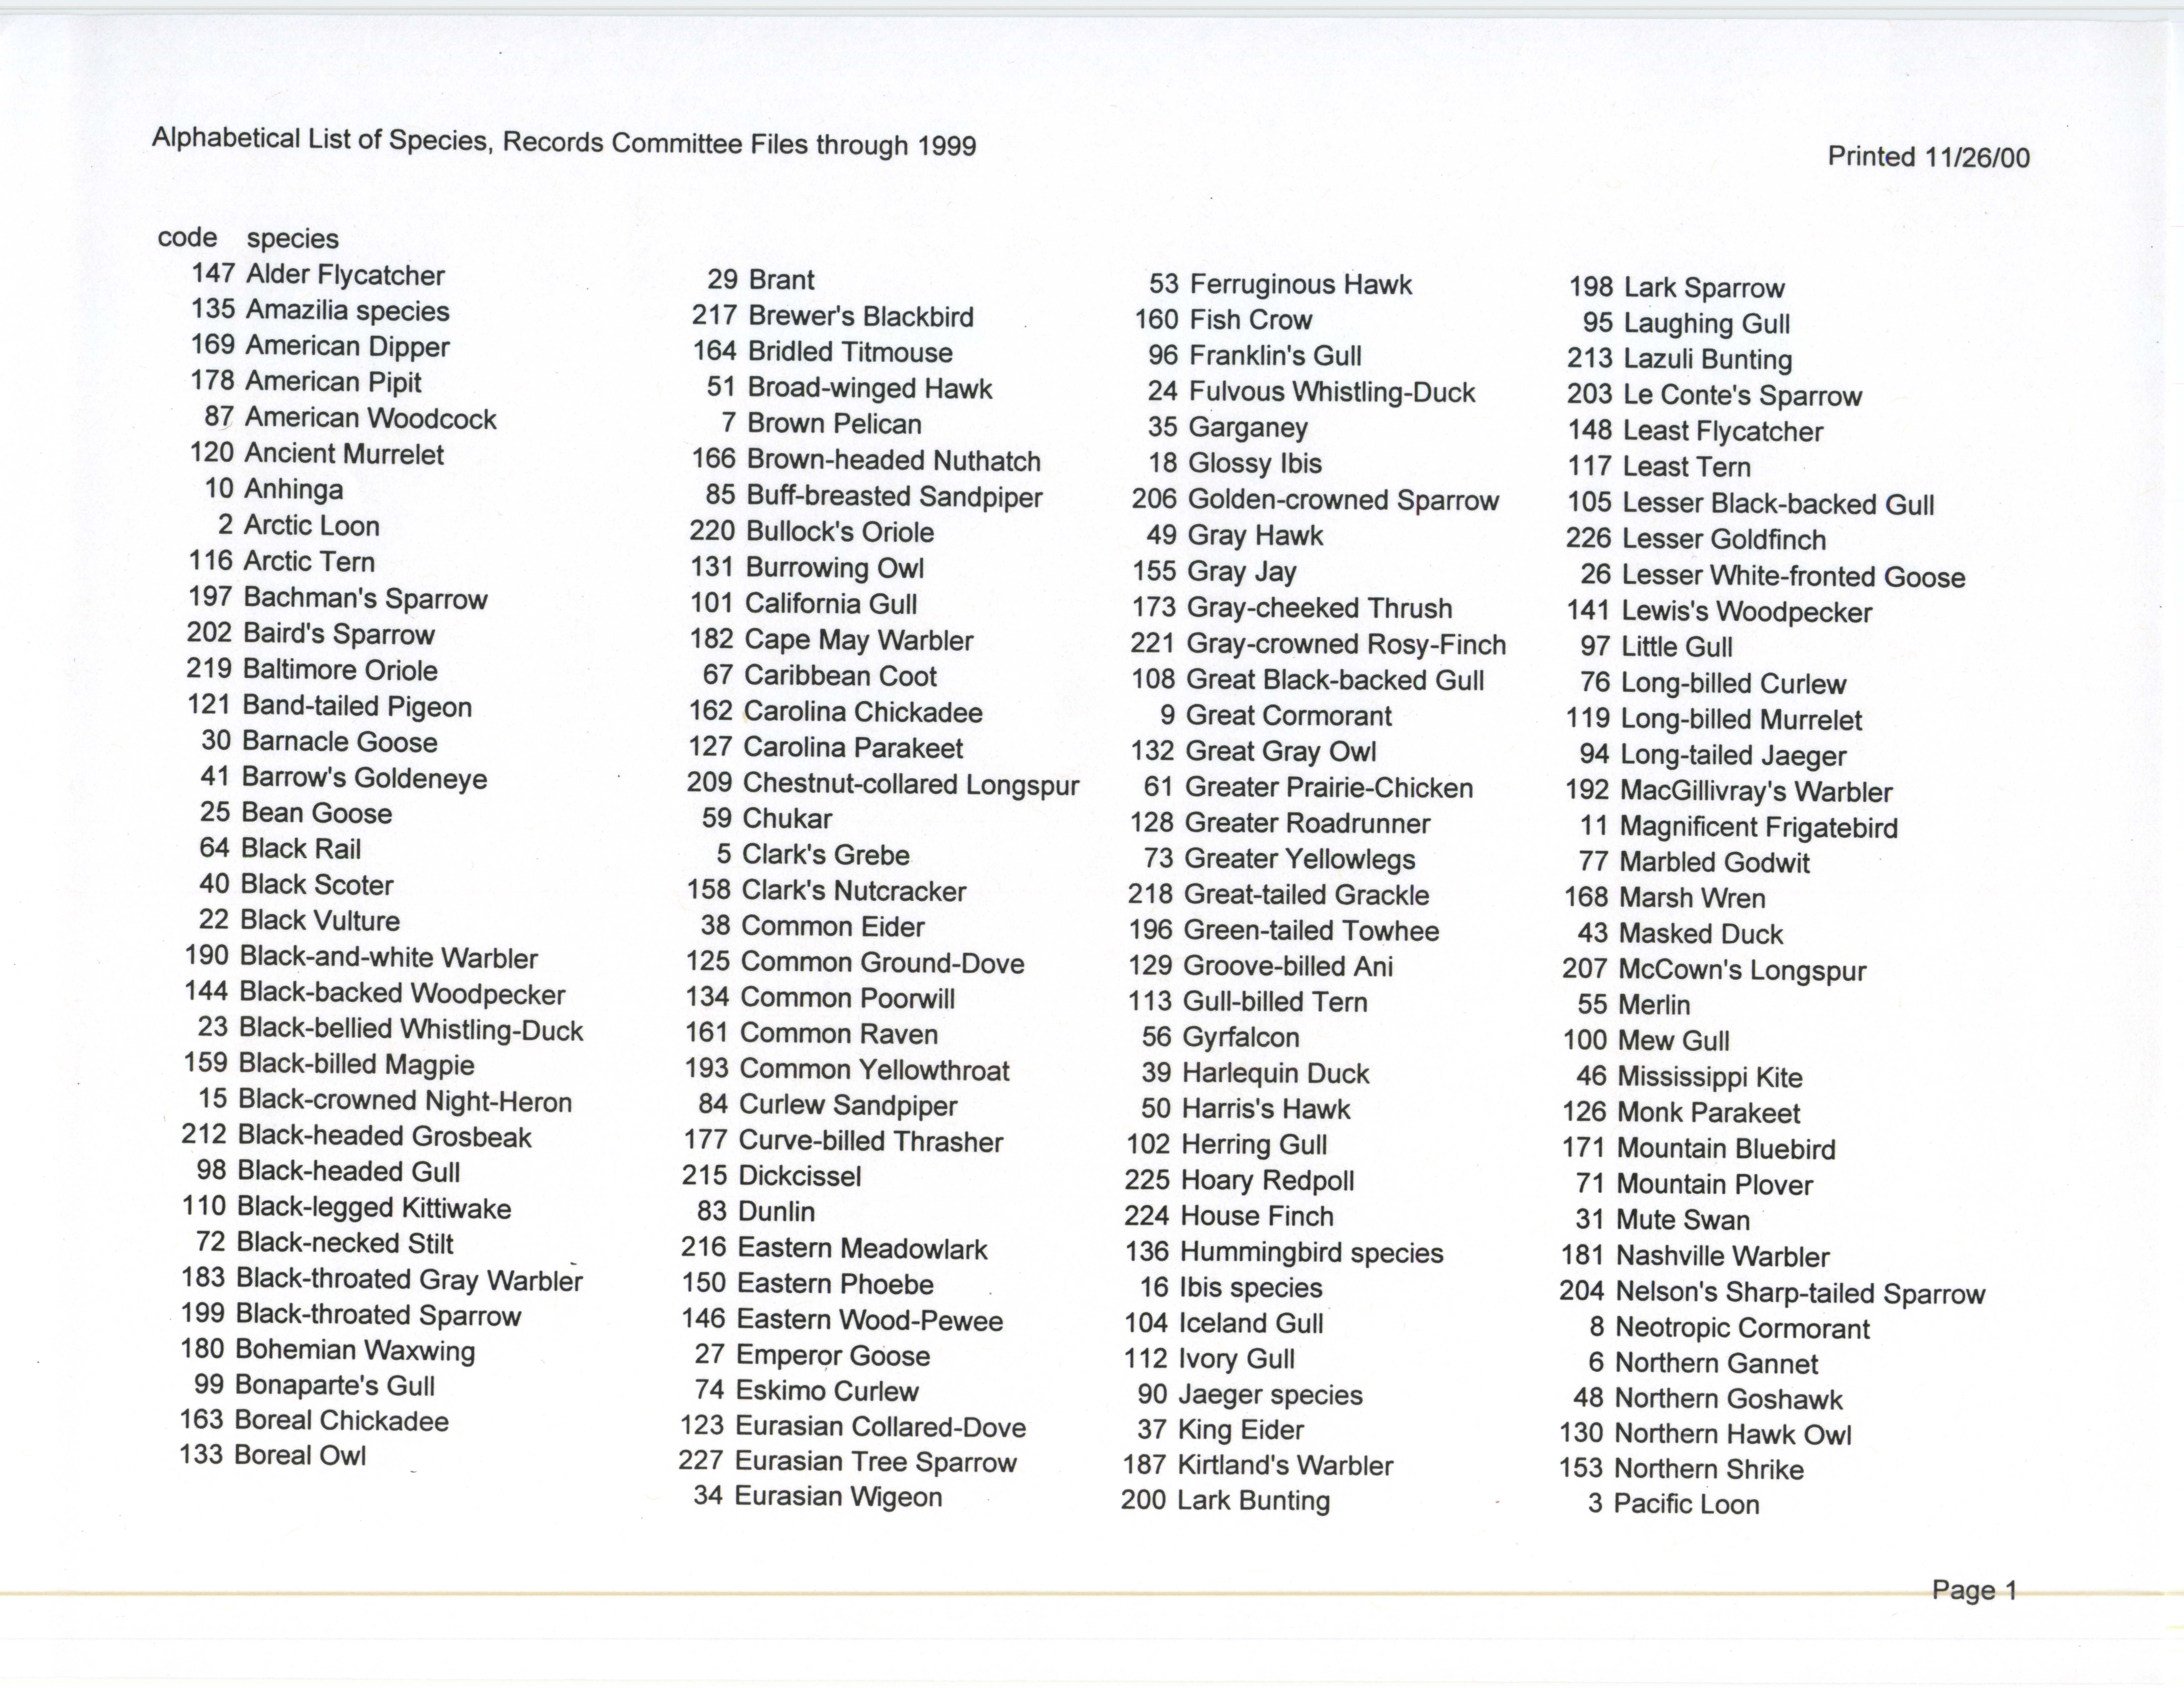 Alphabetical list of species, records committee files through 1999